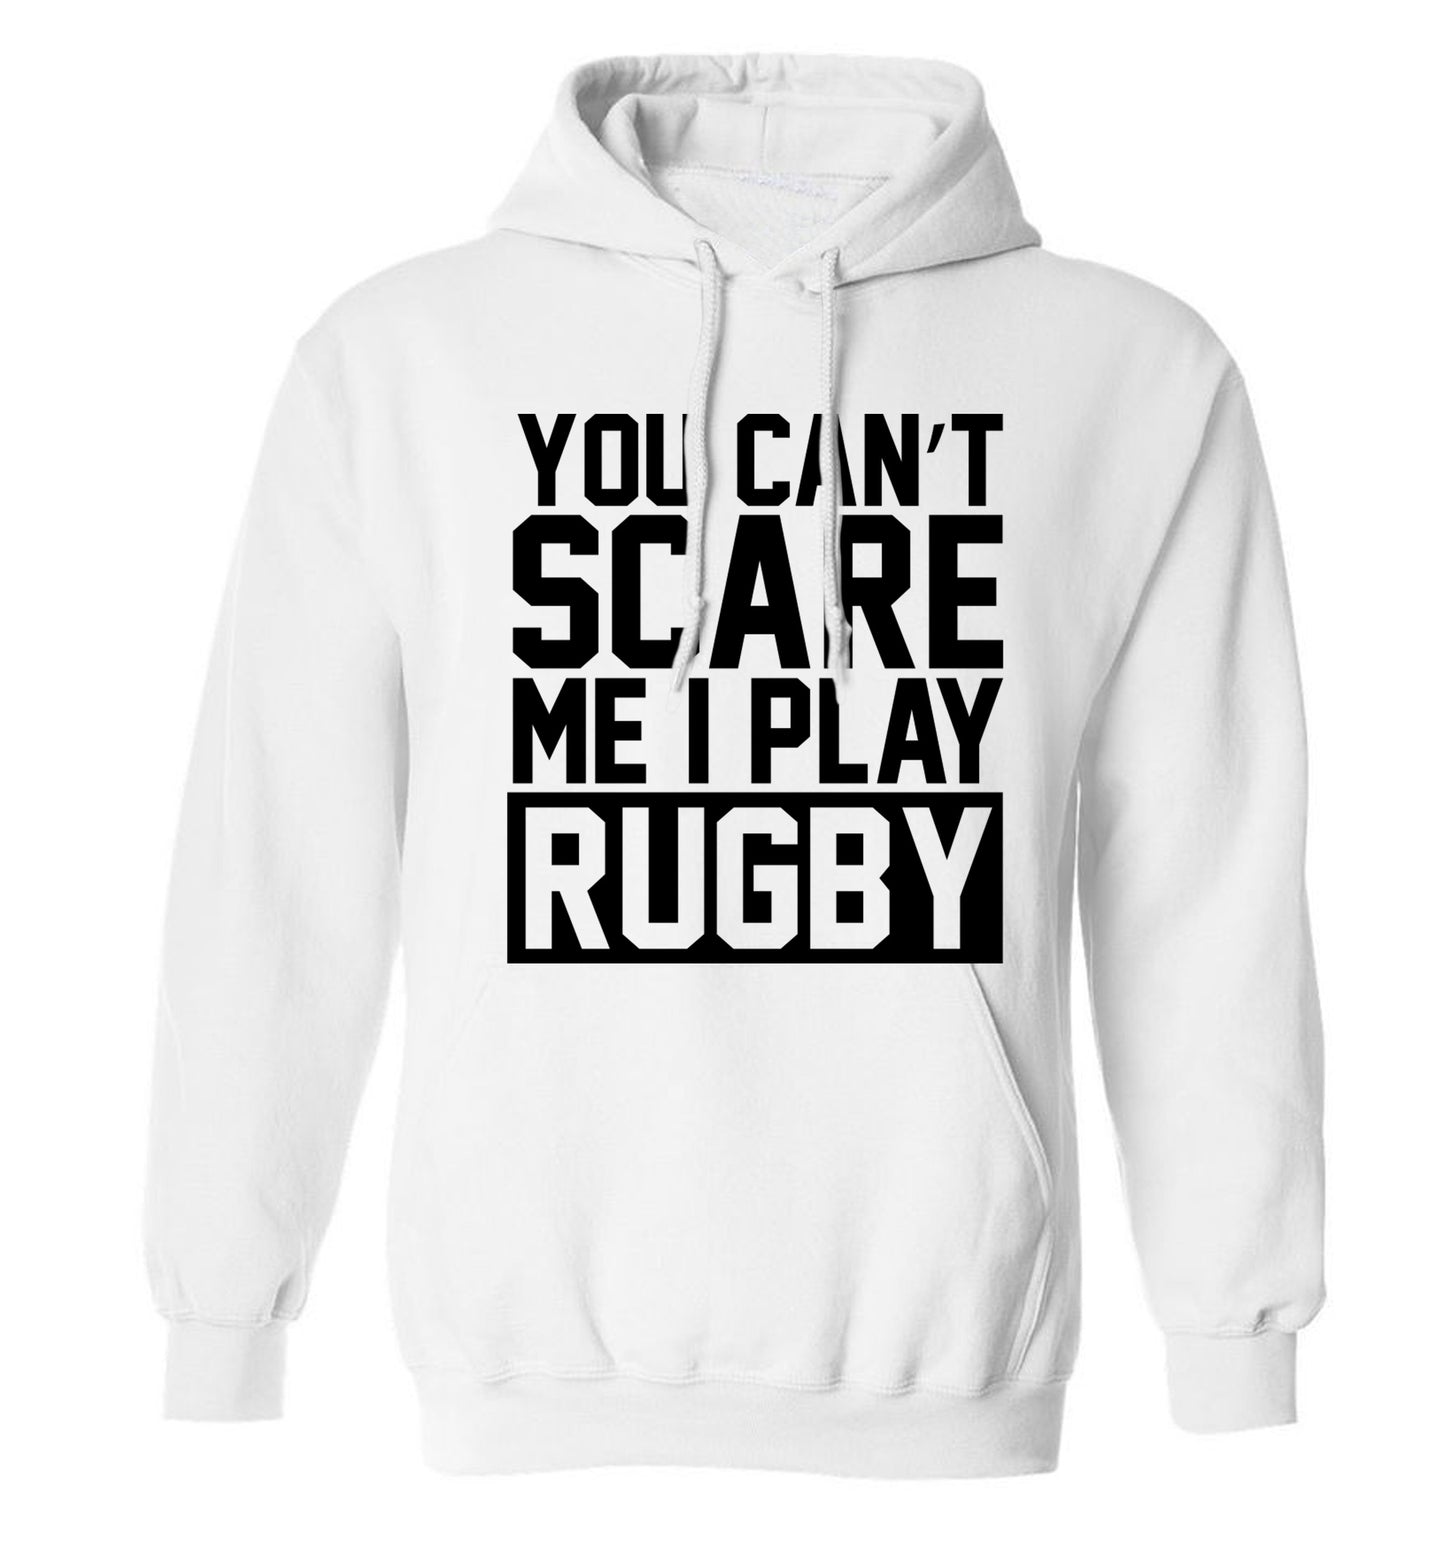 You can't scare me I play rugby adults unisex white hoodie 2XL